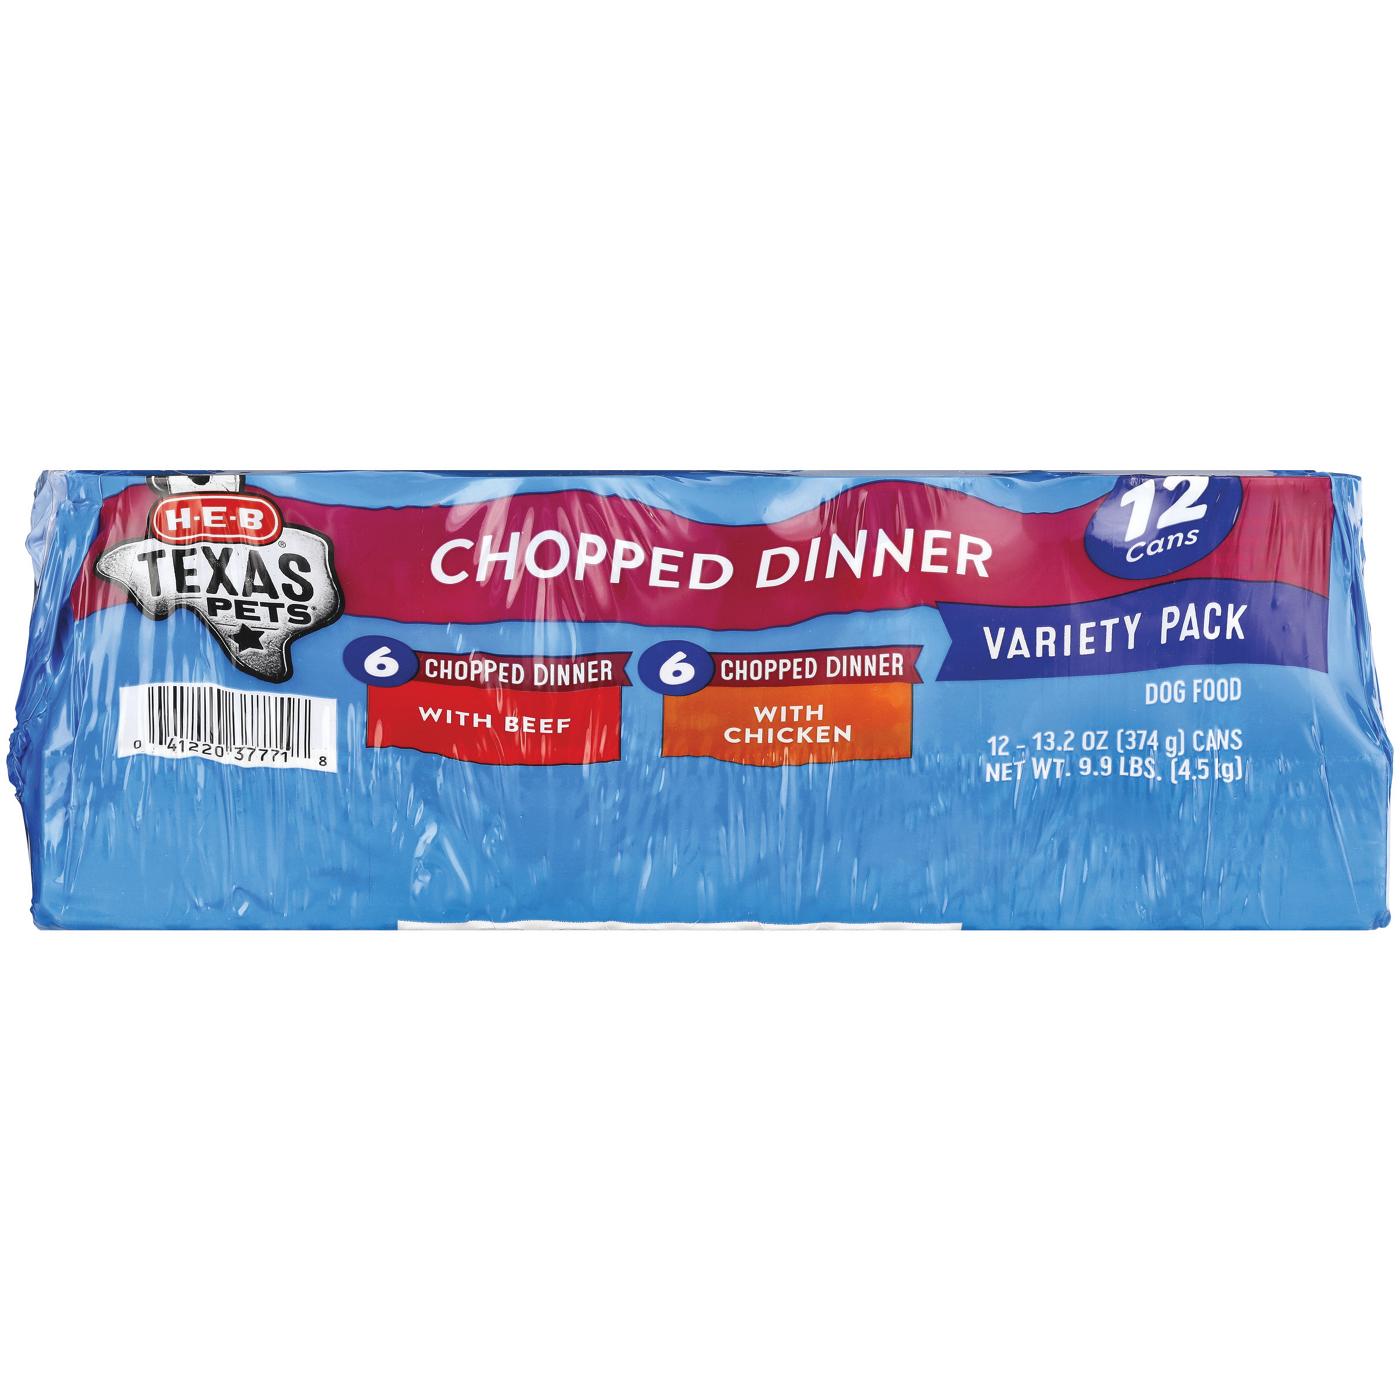 H-E-B Texas Pets Chopped Dinner Wet Dog Food Variety Pack - Chicken & Beef; image 1 of 2